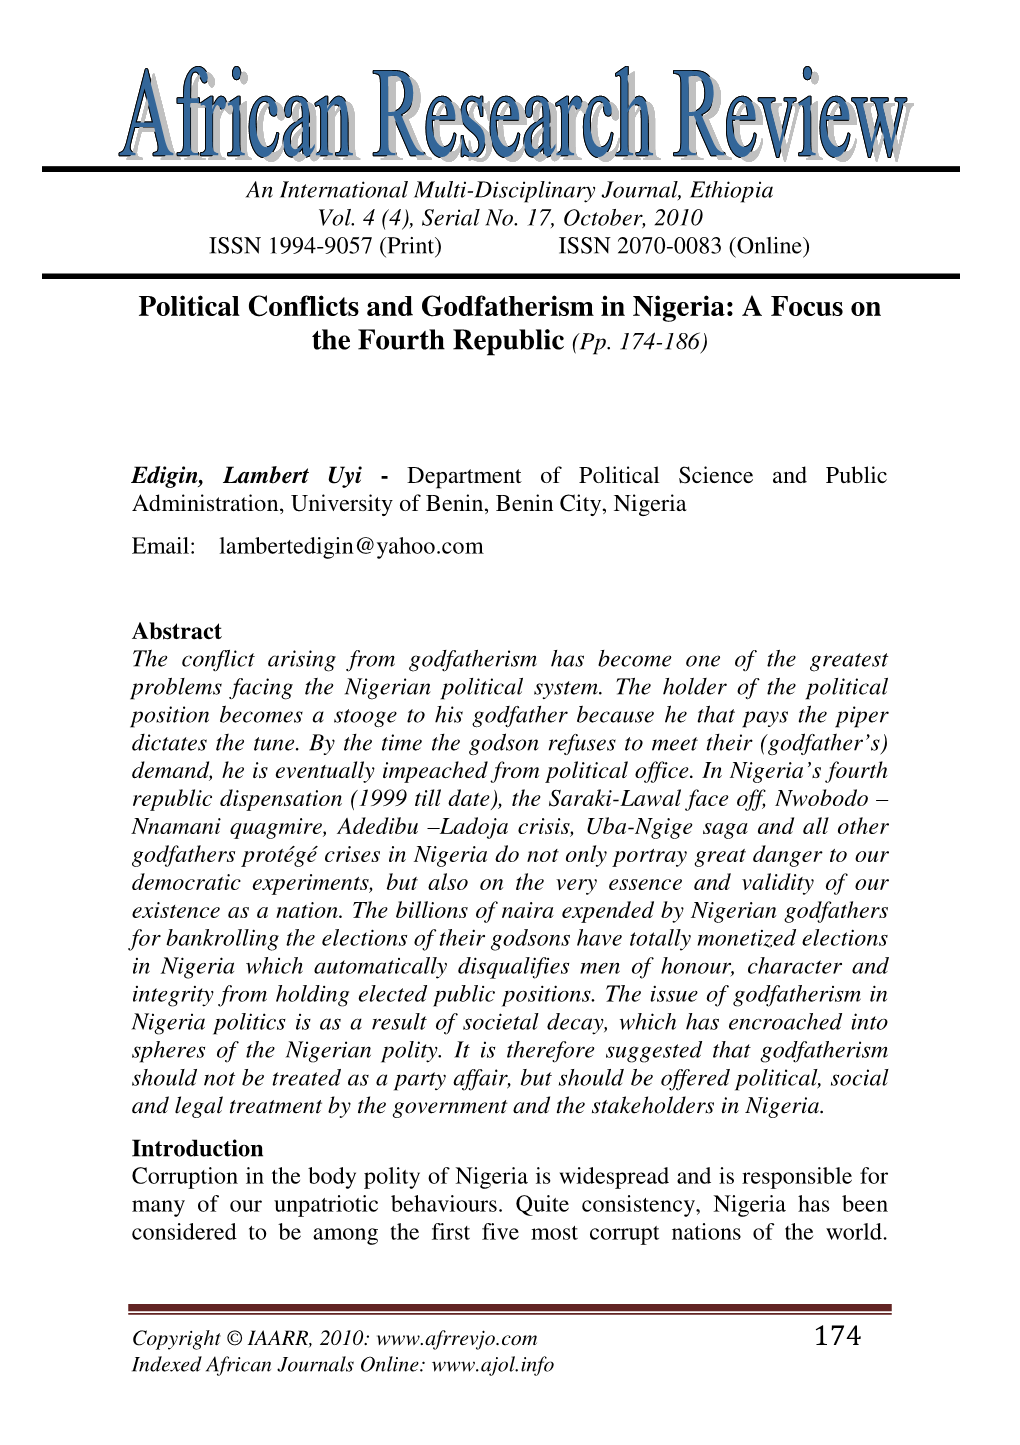 174 Political Conflicts and Godfatherism in Nigeria: a Focus on the Fourth Republic